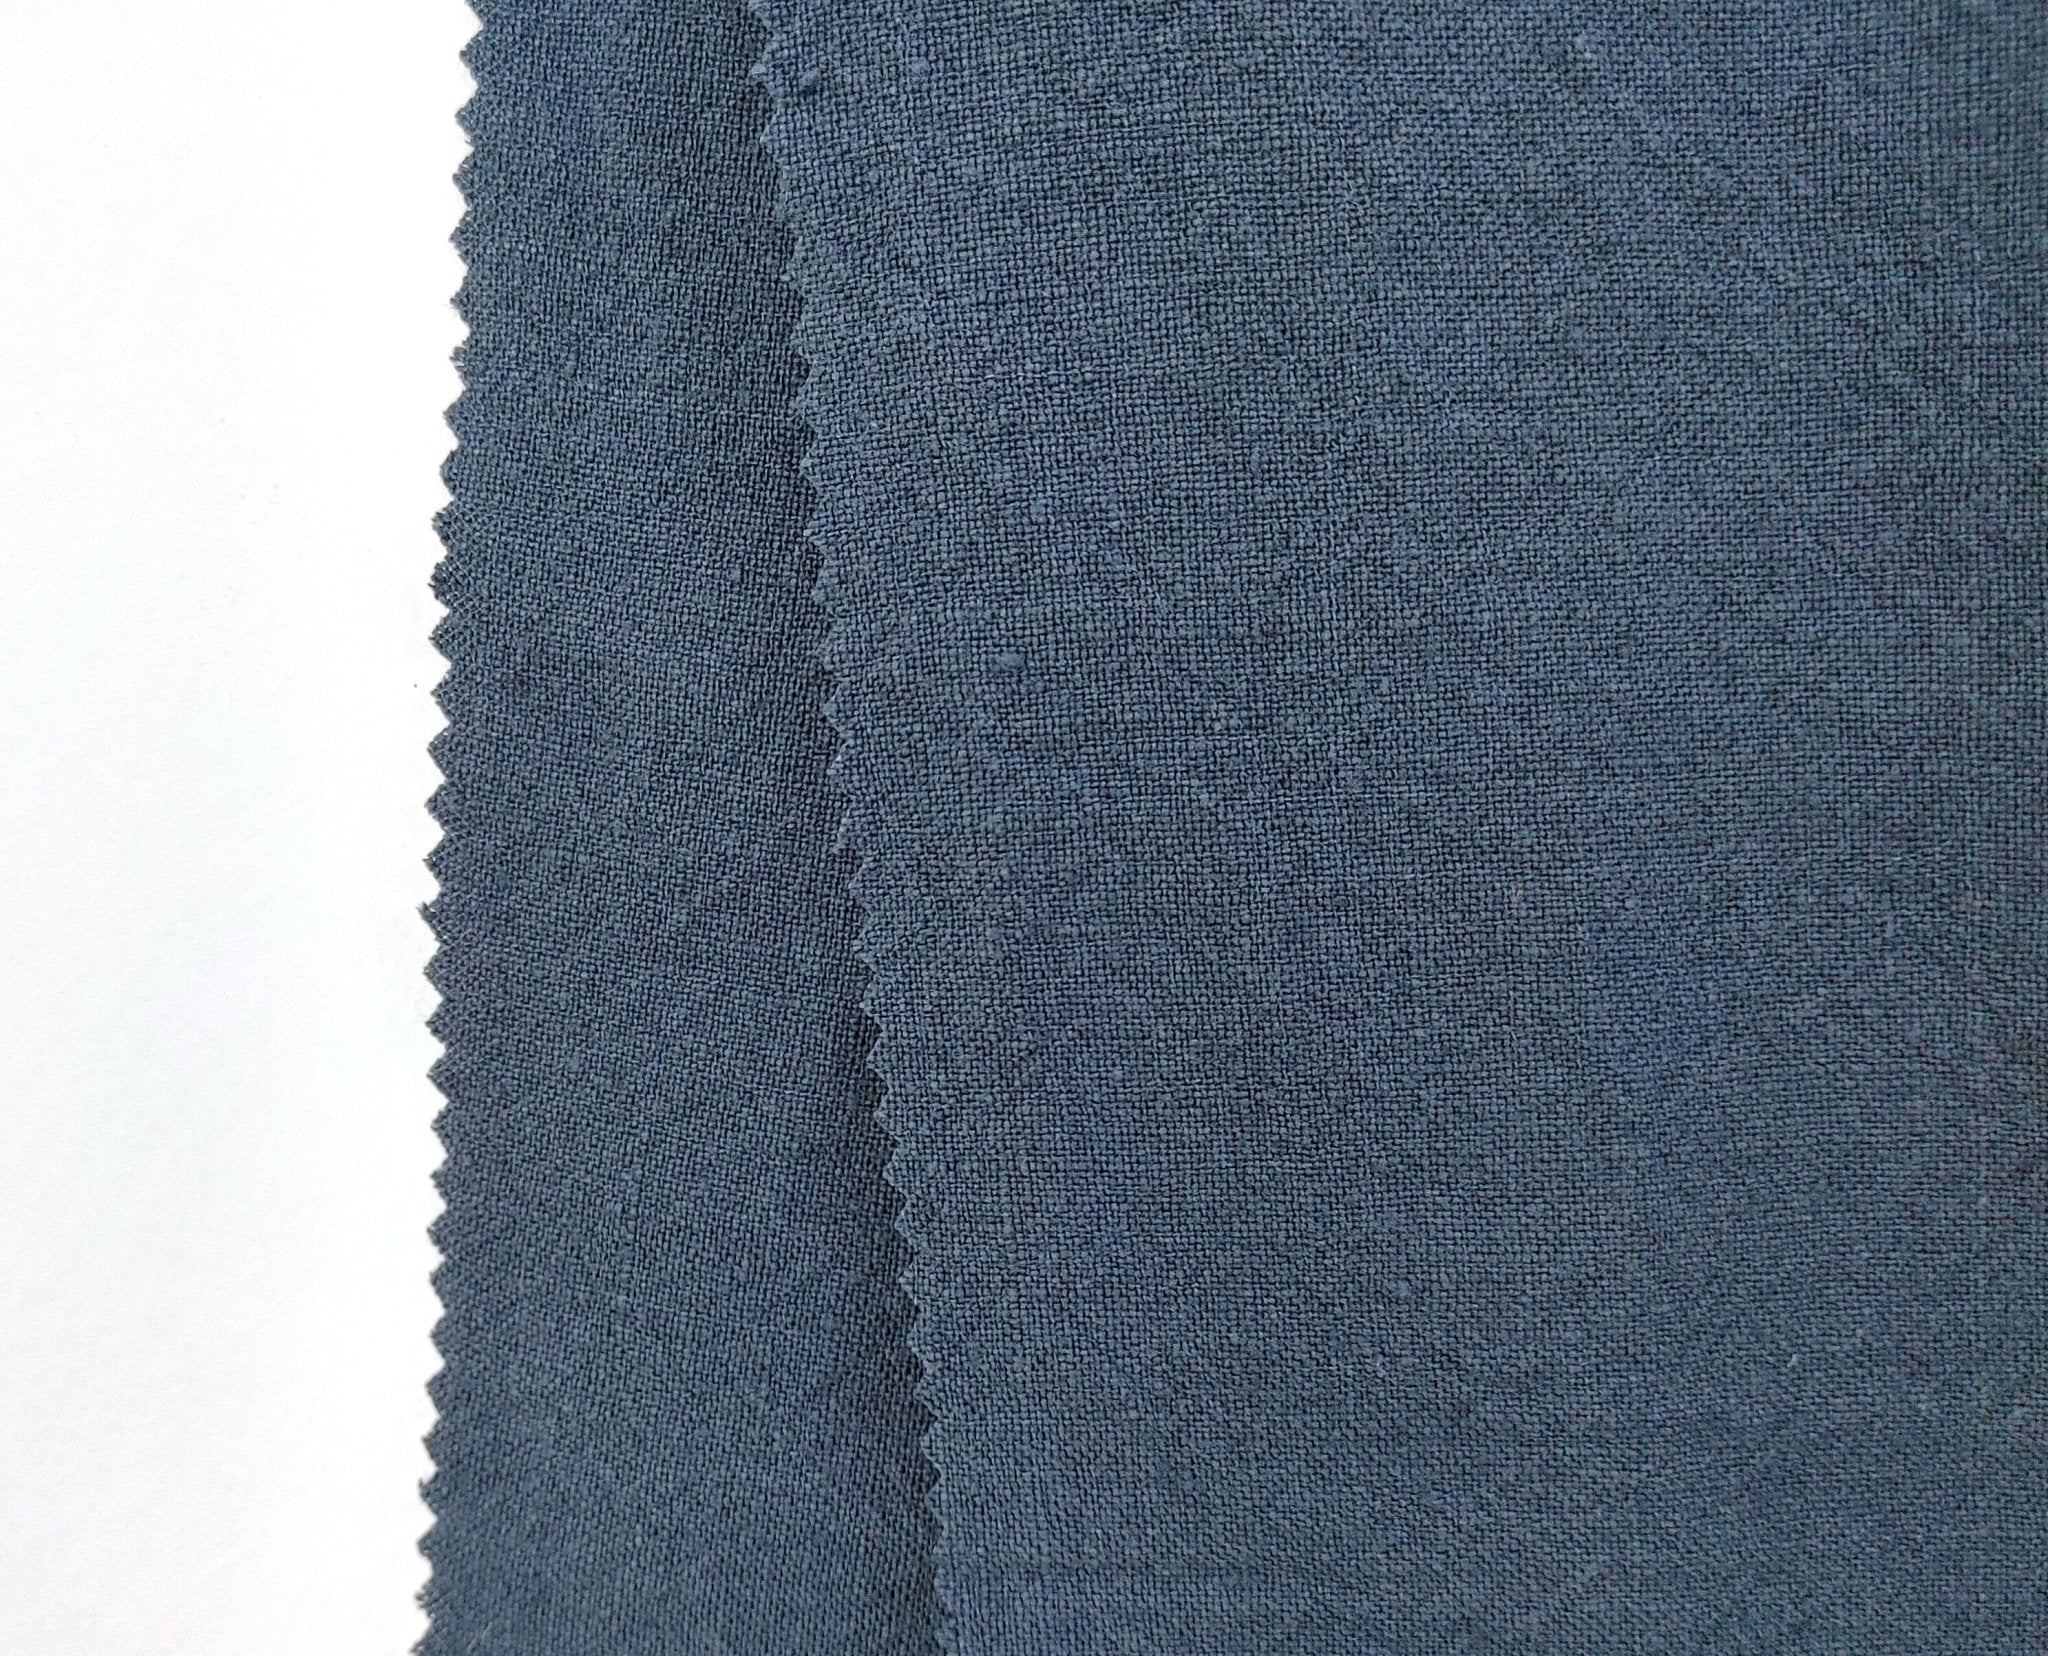 Premium 100% Linen Fabric - 9S High Twisted Yarn for Luxurious Textiles and Crafting Excellence 6772 6481 6480 - The Linen Lab - Blue